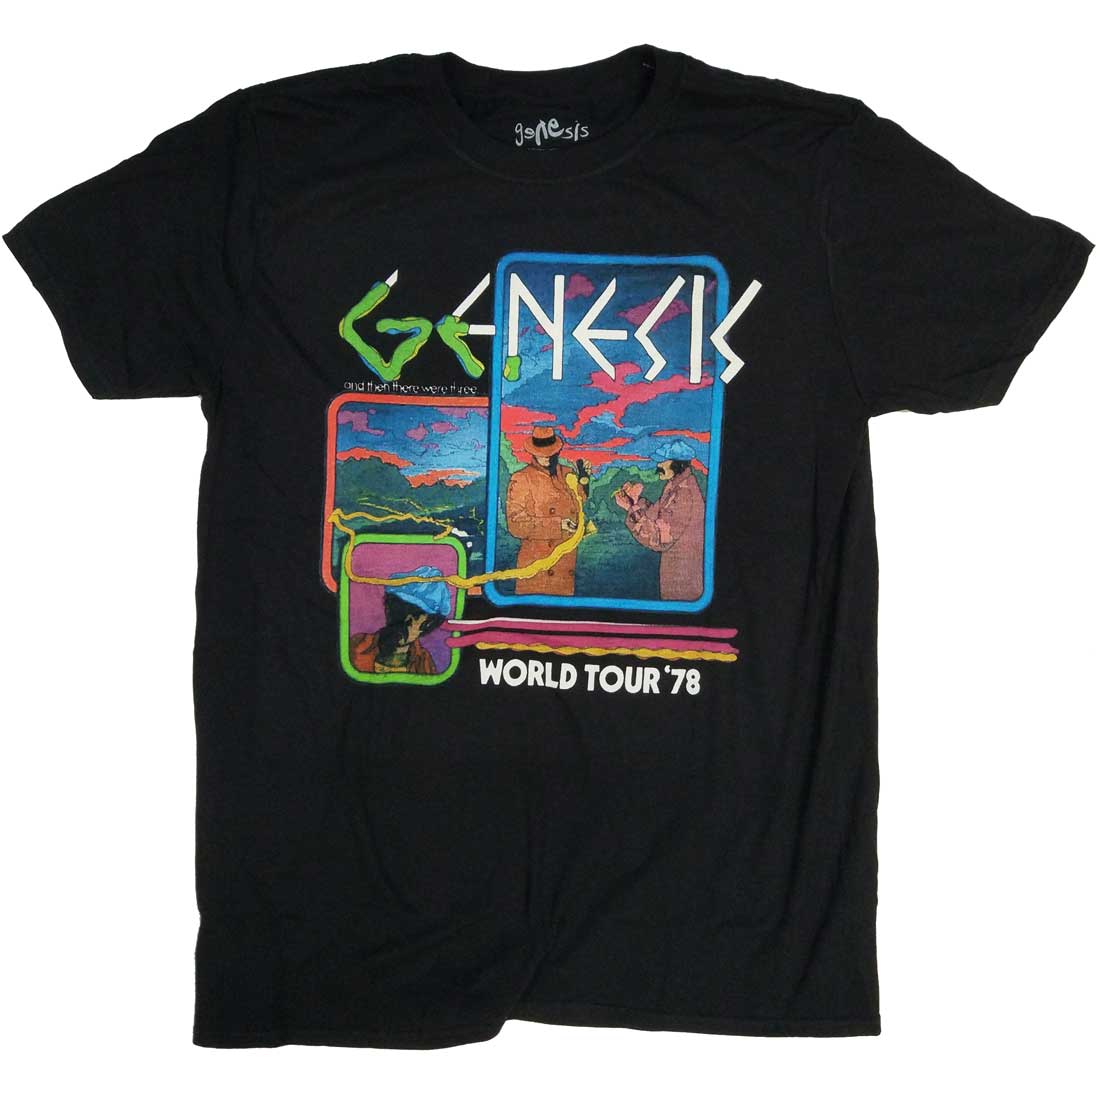 Genesis T Shirt - Then There Were Three Tour 78 Retro 100% Official Old Skool Hooligans